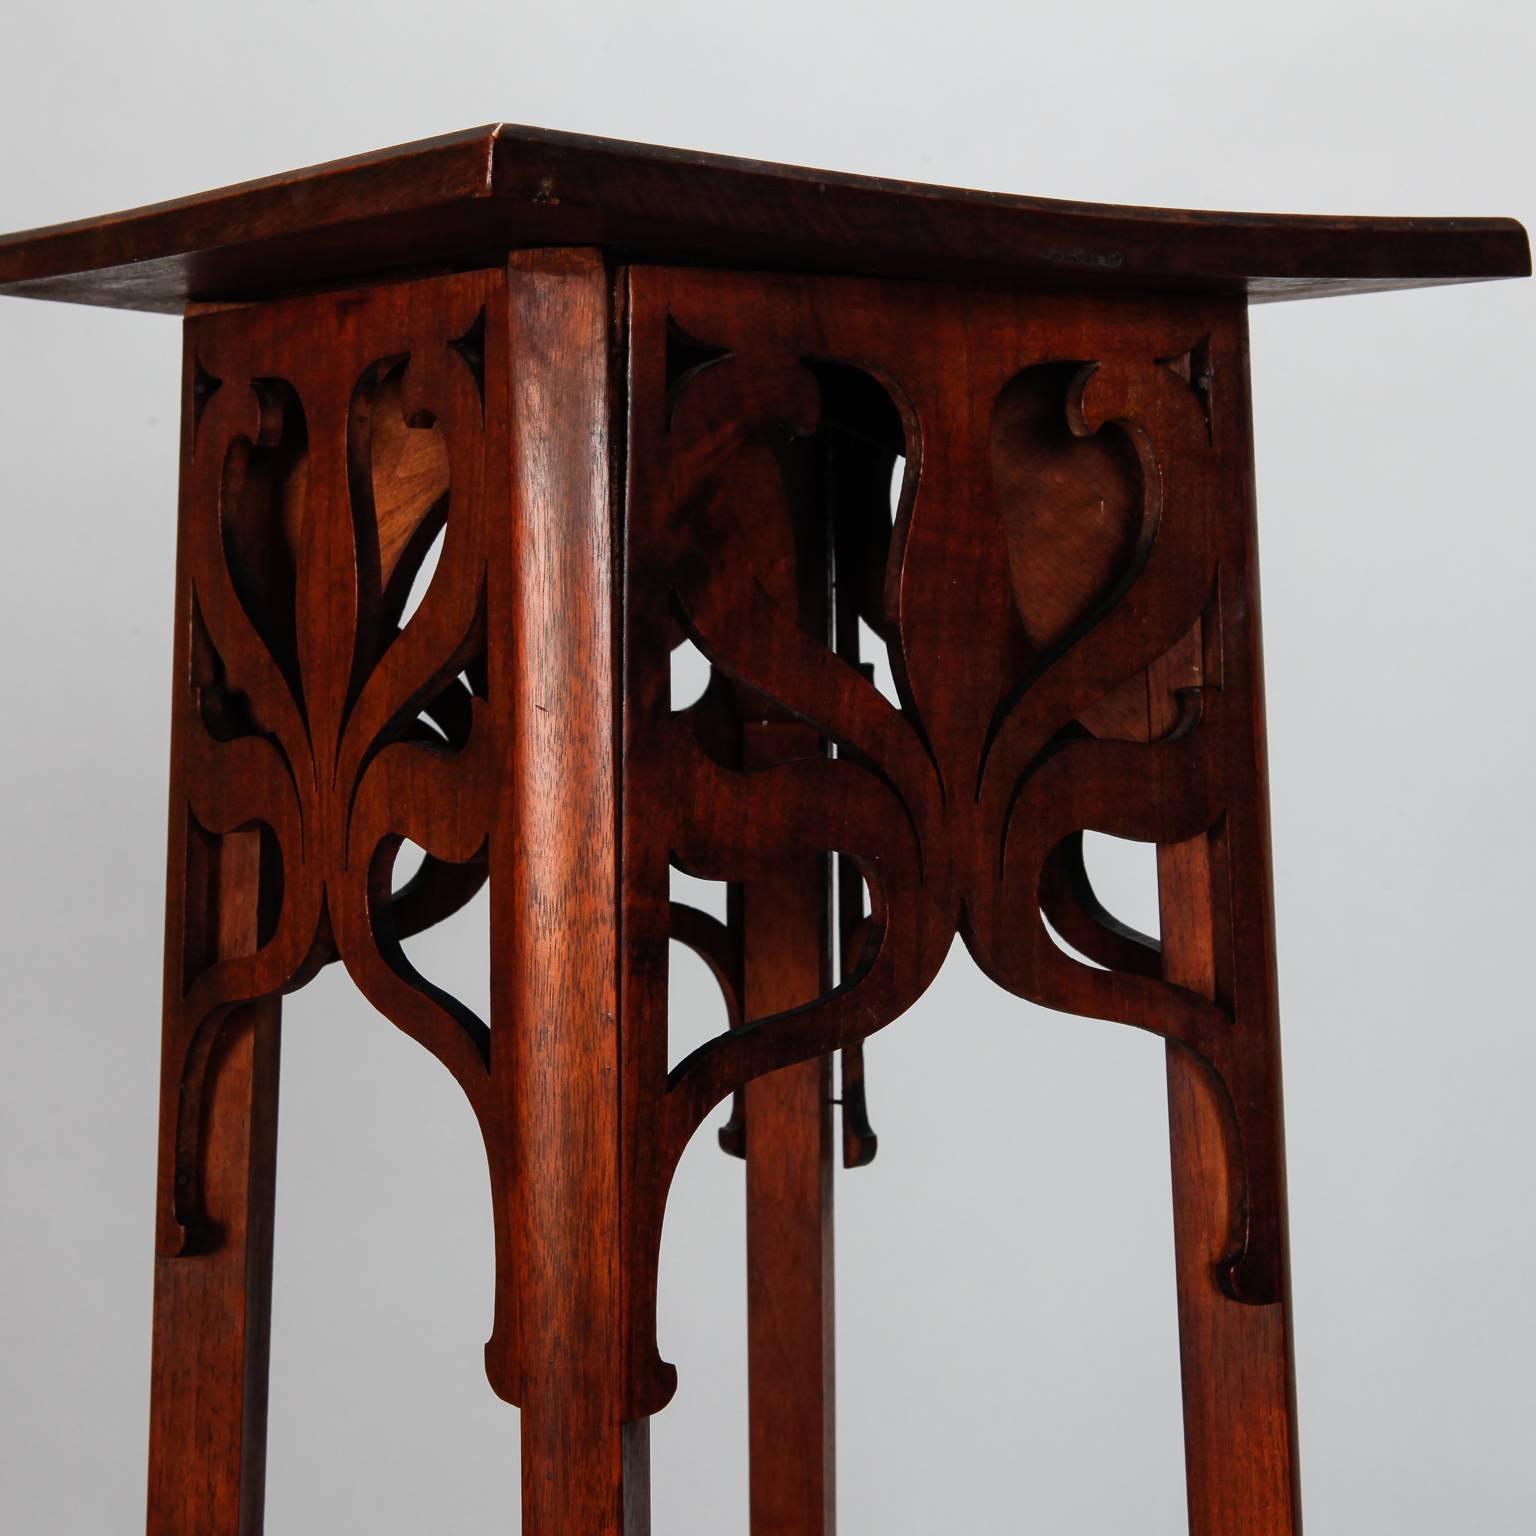 Tall narrow American wood table for displaying a statue or plant. Table features classic Arts and Crafts style with decorative, open work apron, and details carved in relief on table top and lower tier. Table top measures 11.5